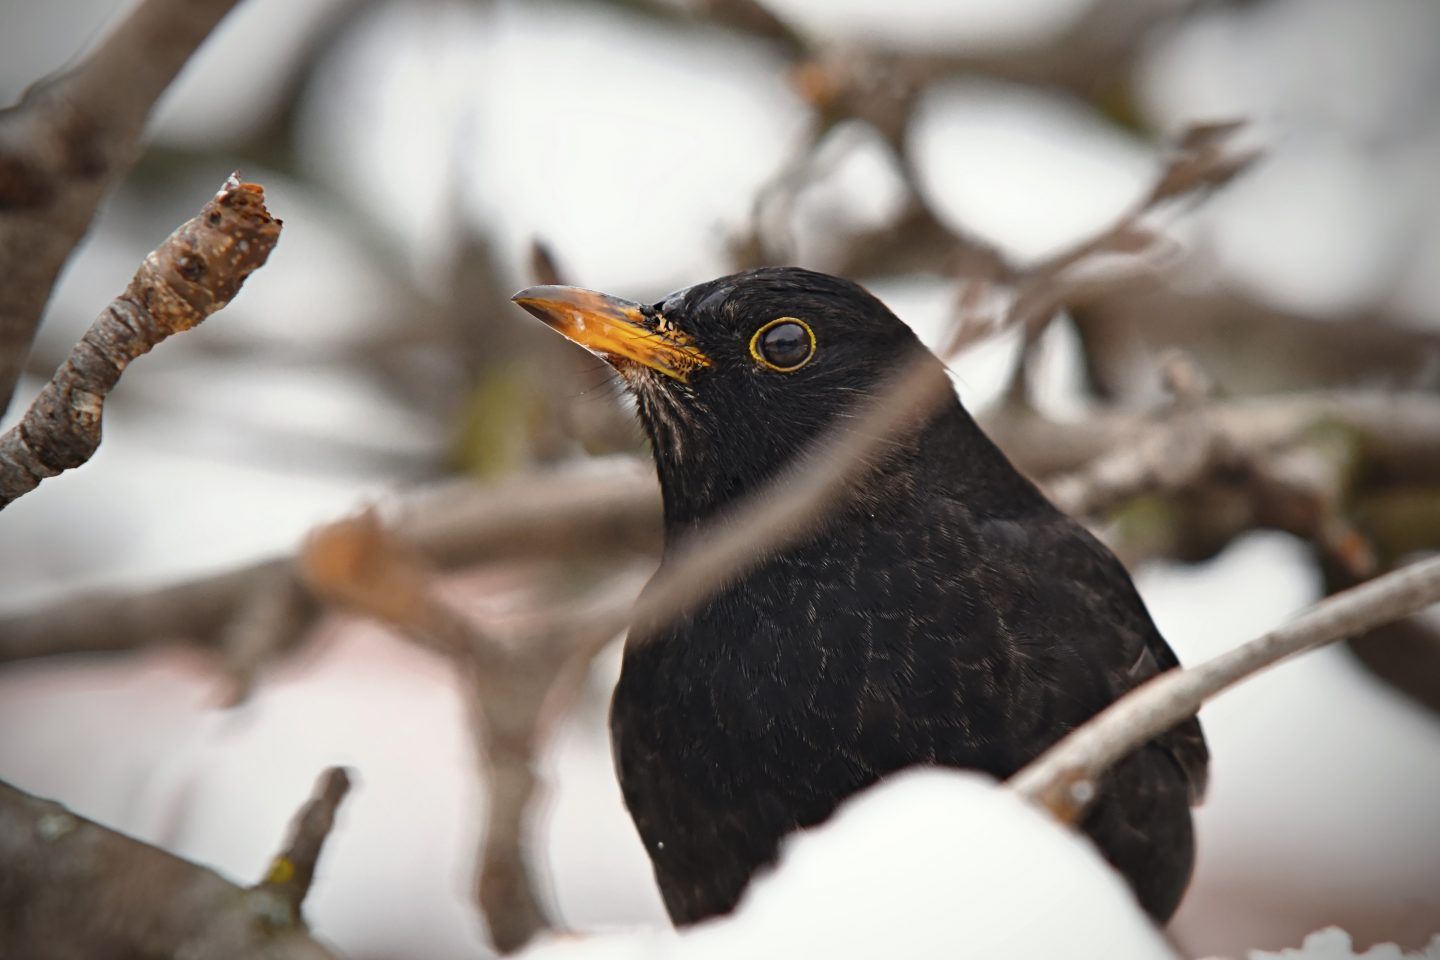 Blackbird peering out from between twigs in tree in the snow